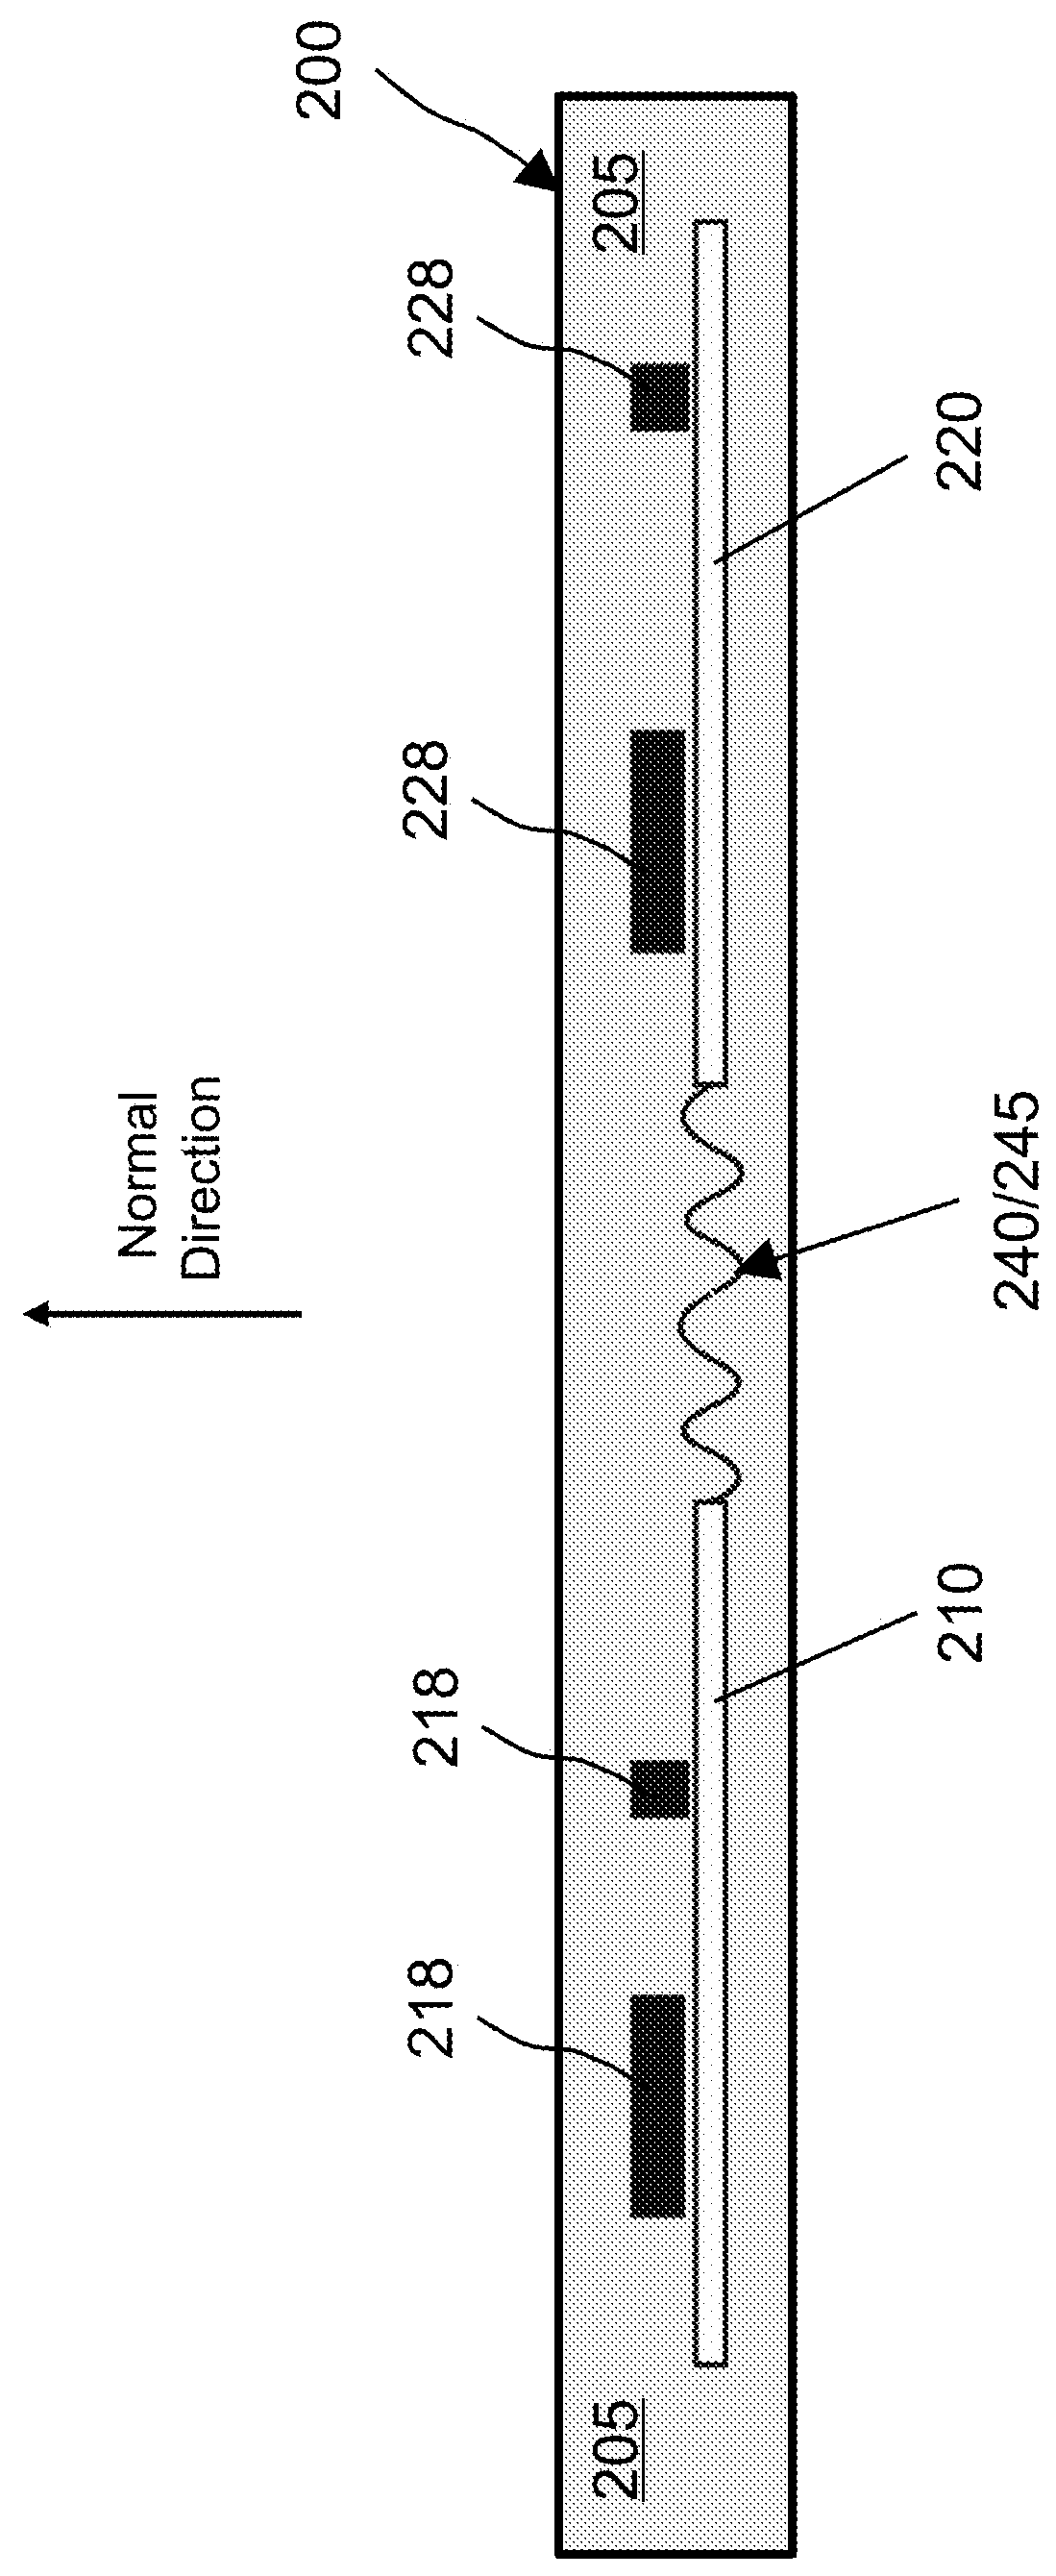 Stretchable electronic patch having a foldable circuit layer